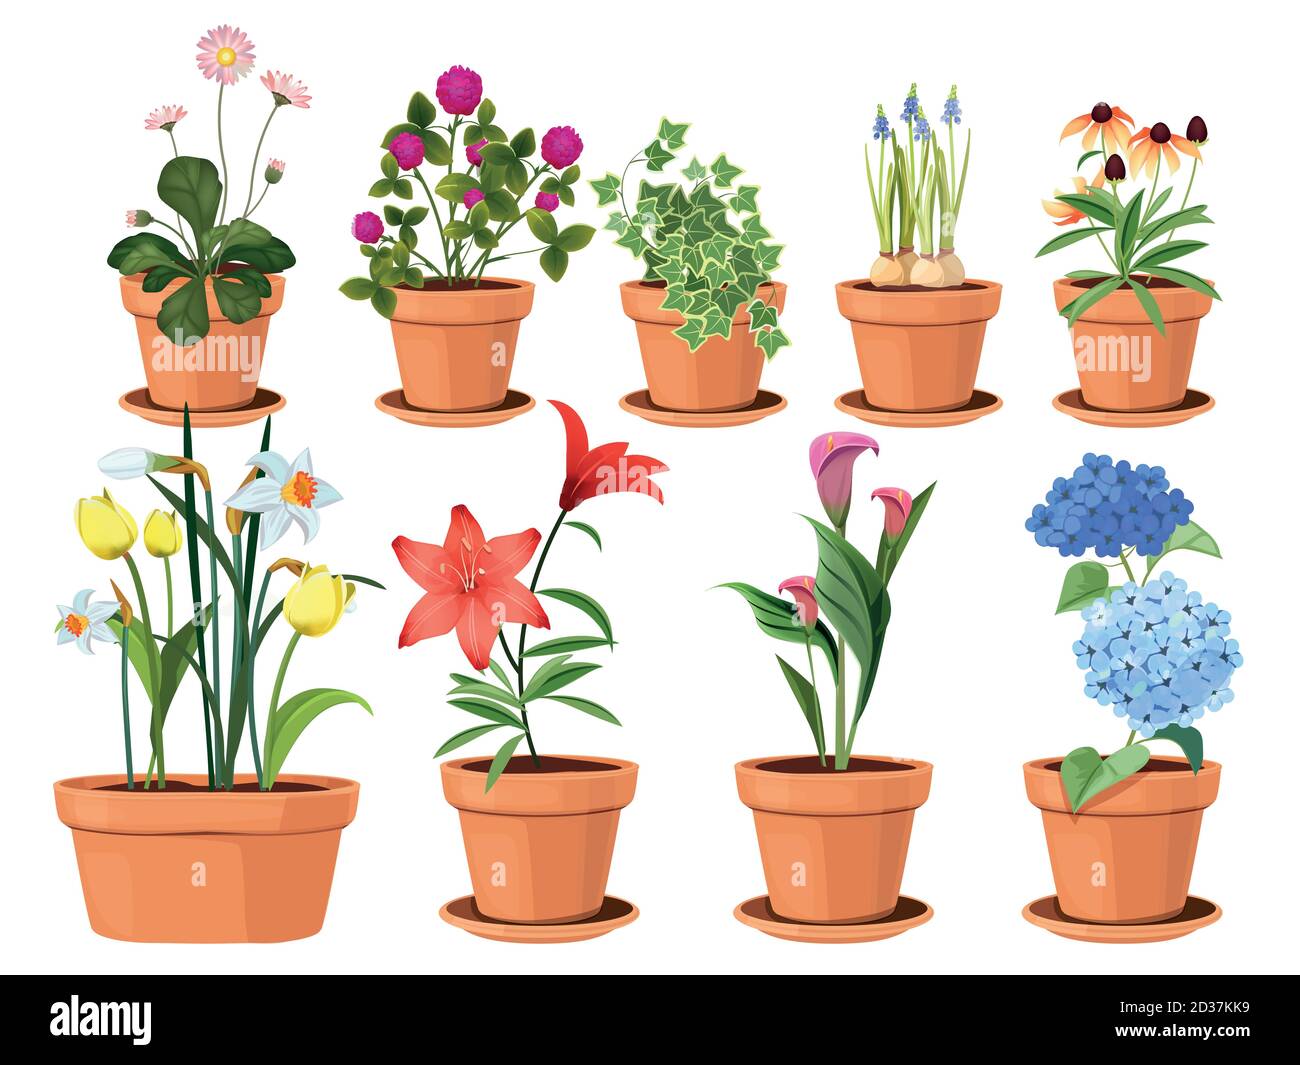 Group of pot Stock Vector Images - Alamy